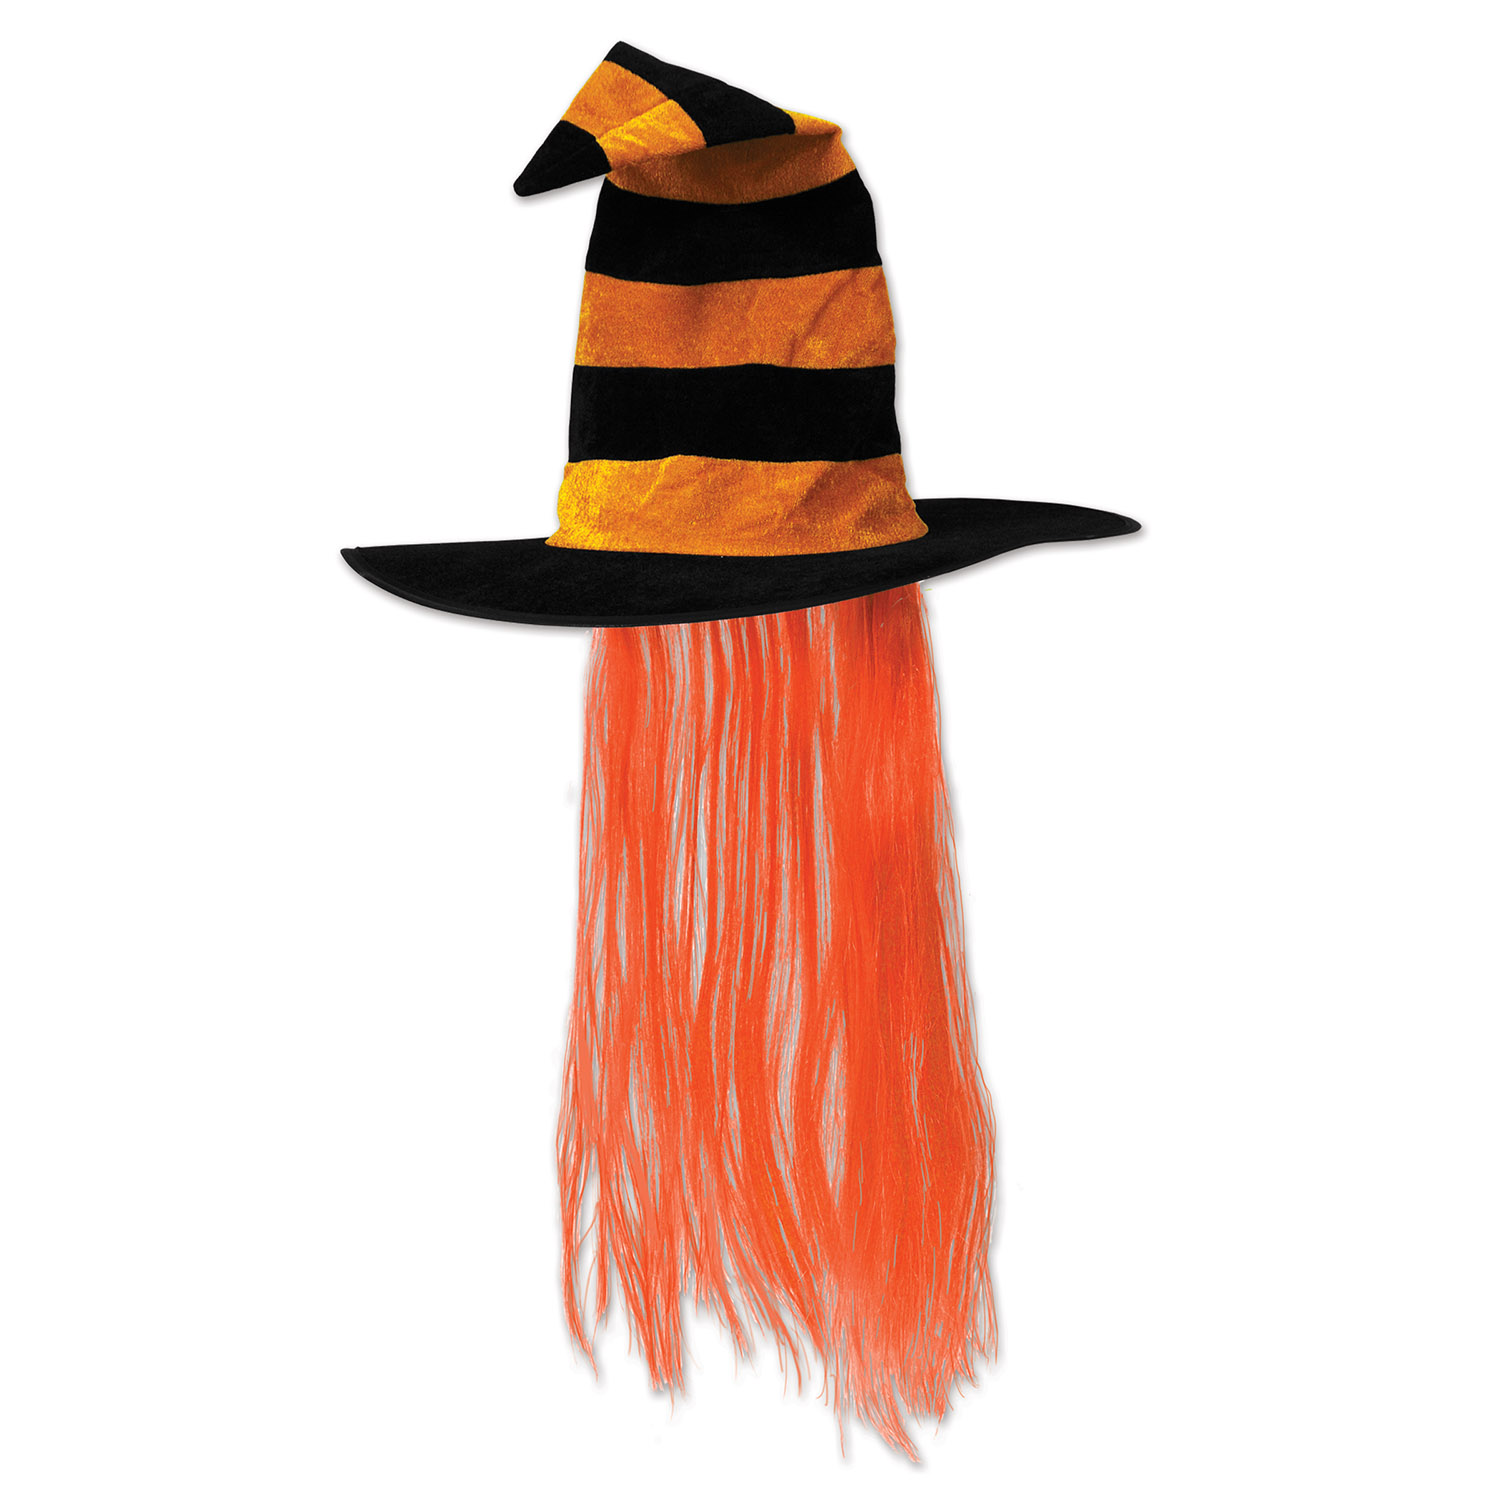 Witch HAT w/Hair